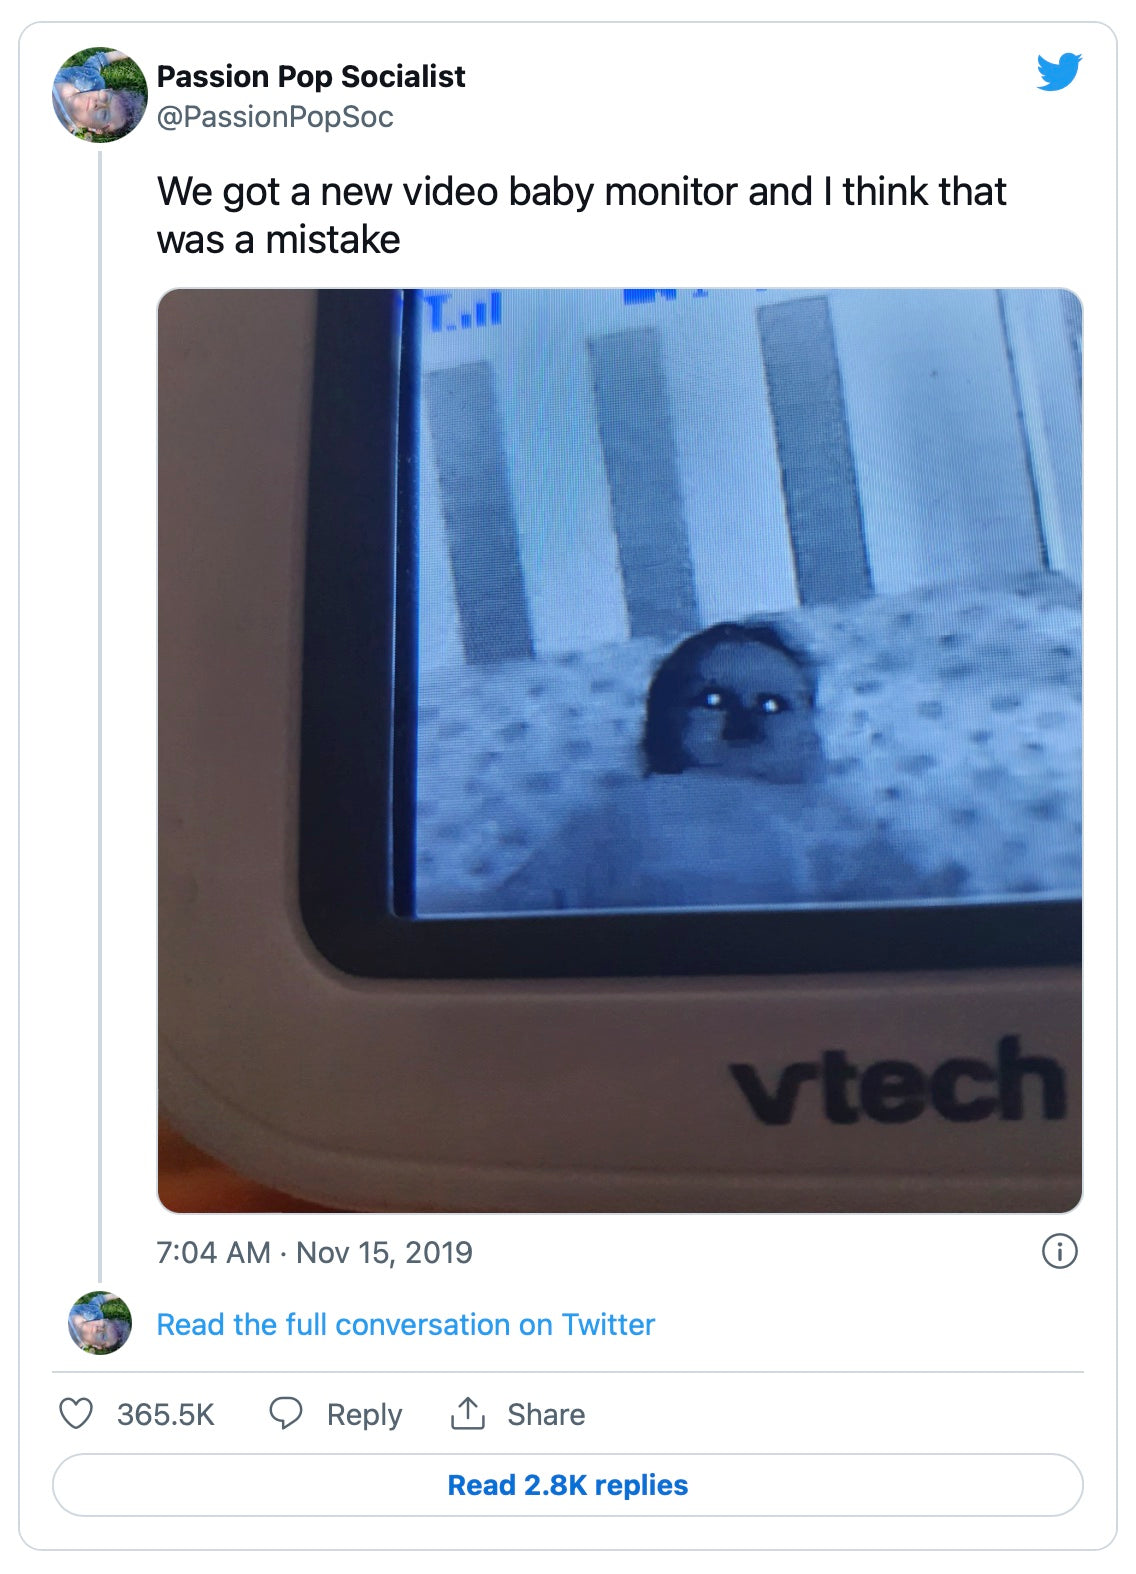 twitter use was scared by the poor quality of the baby monitor